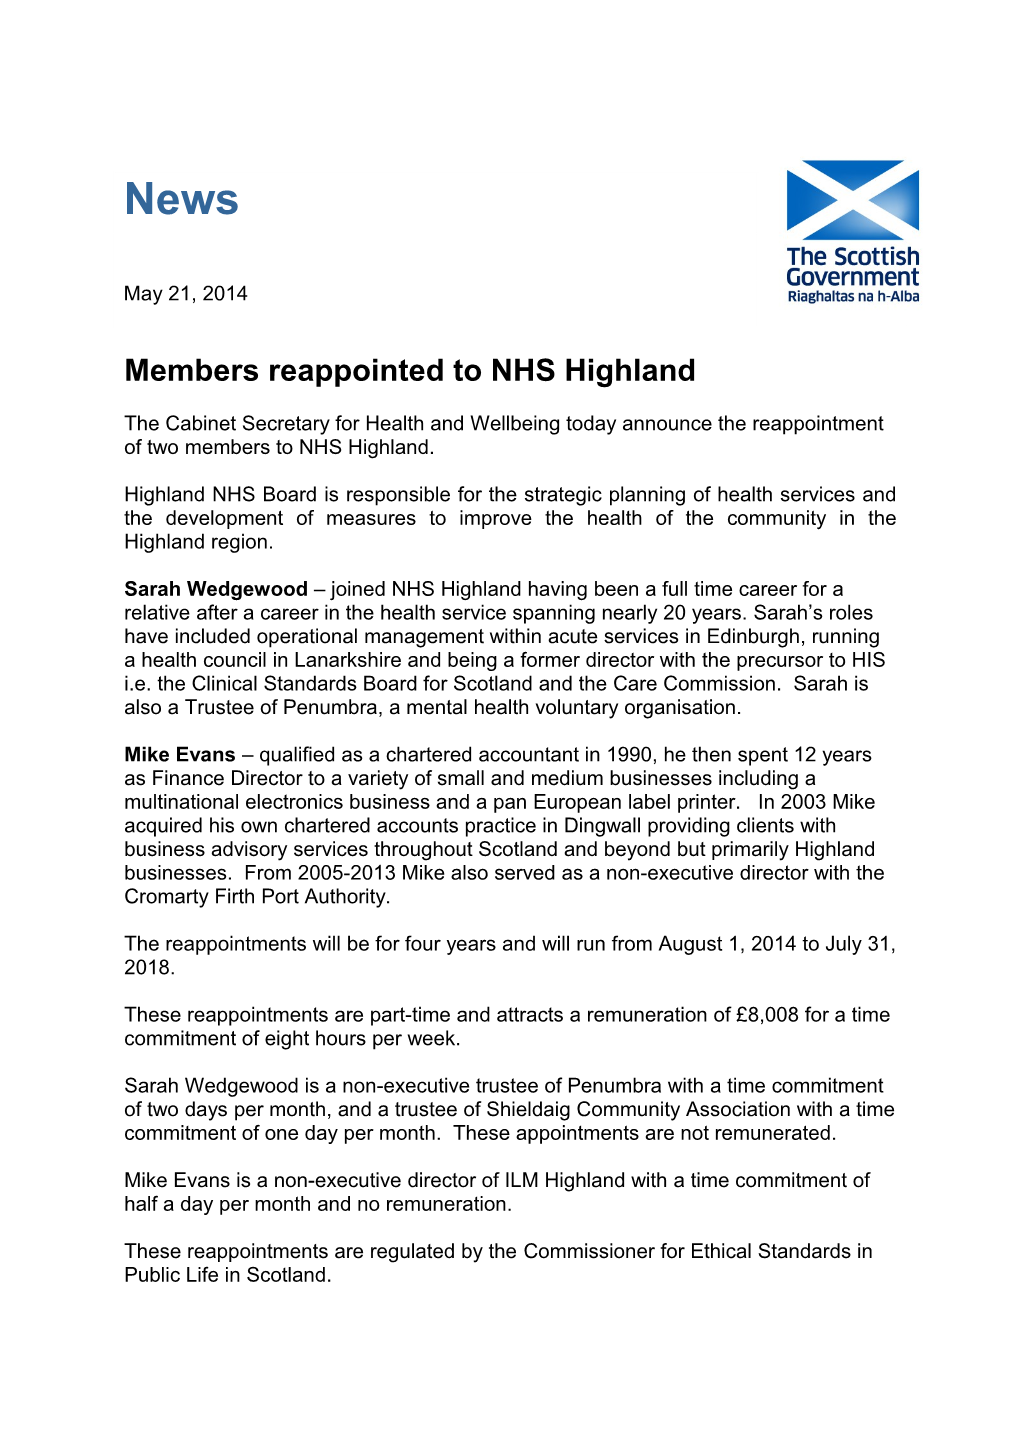 Members Reappointed to NHS Highland